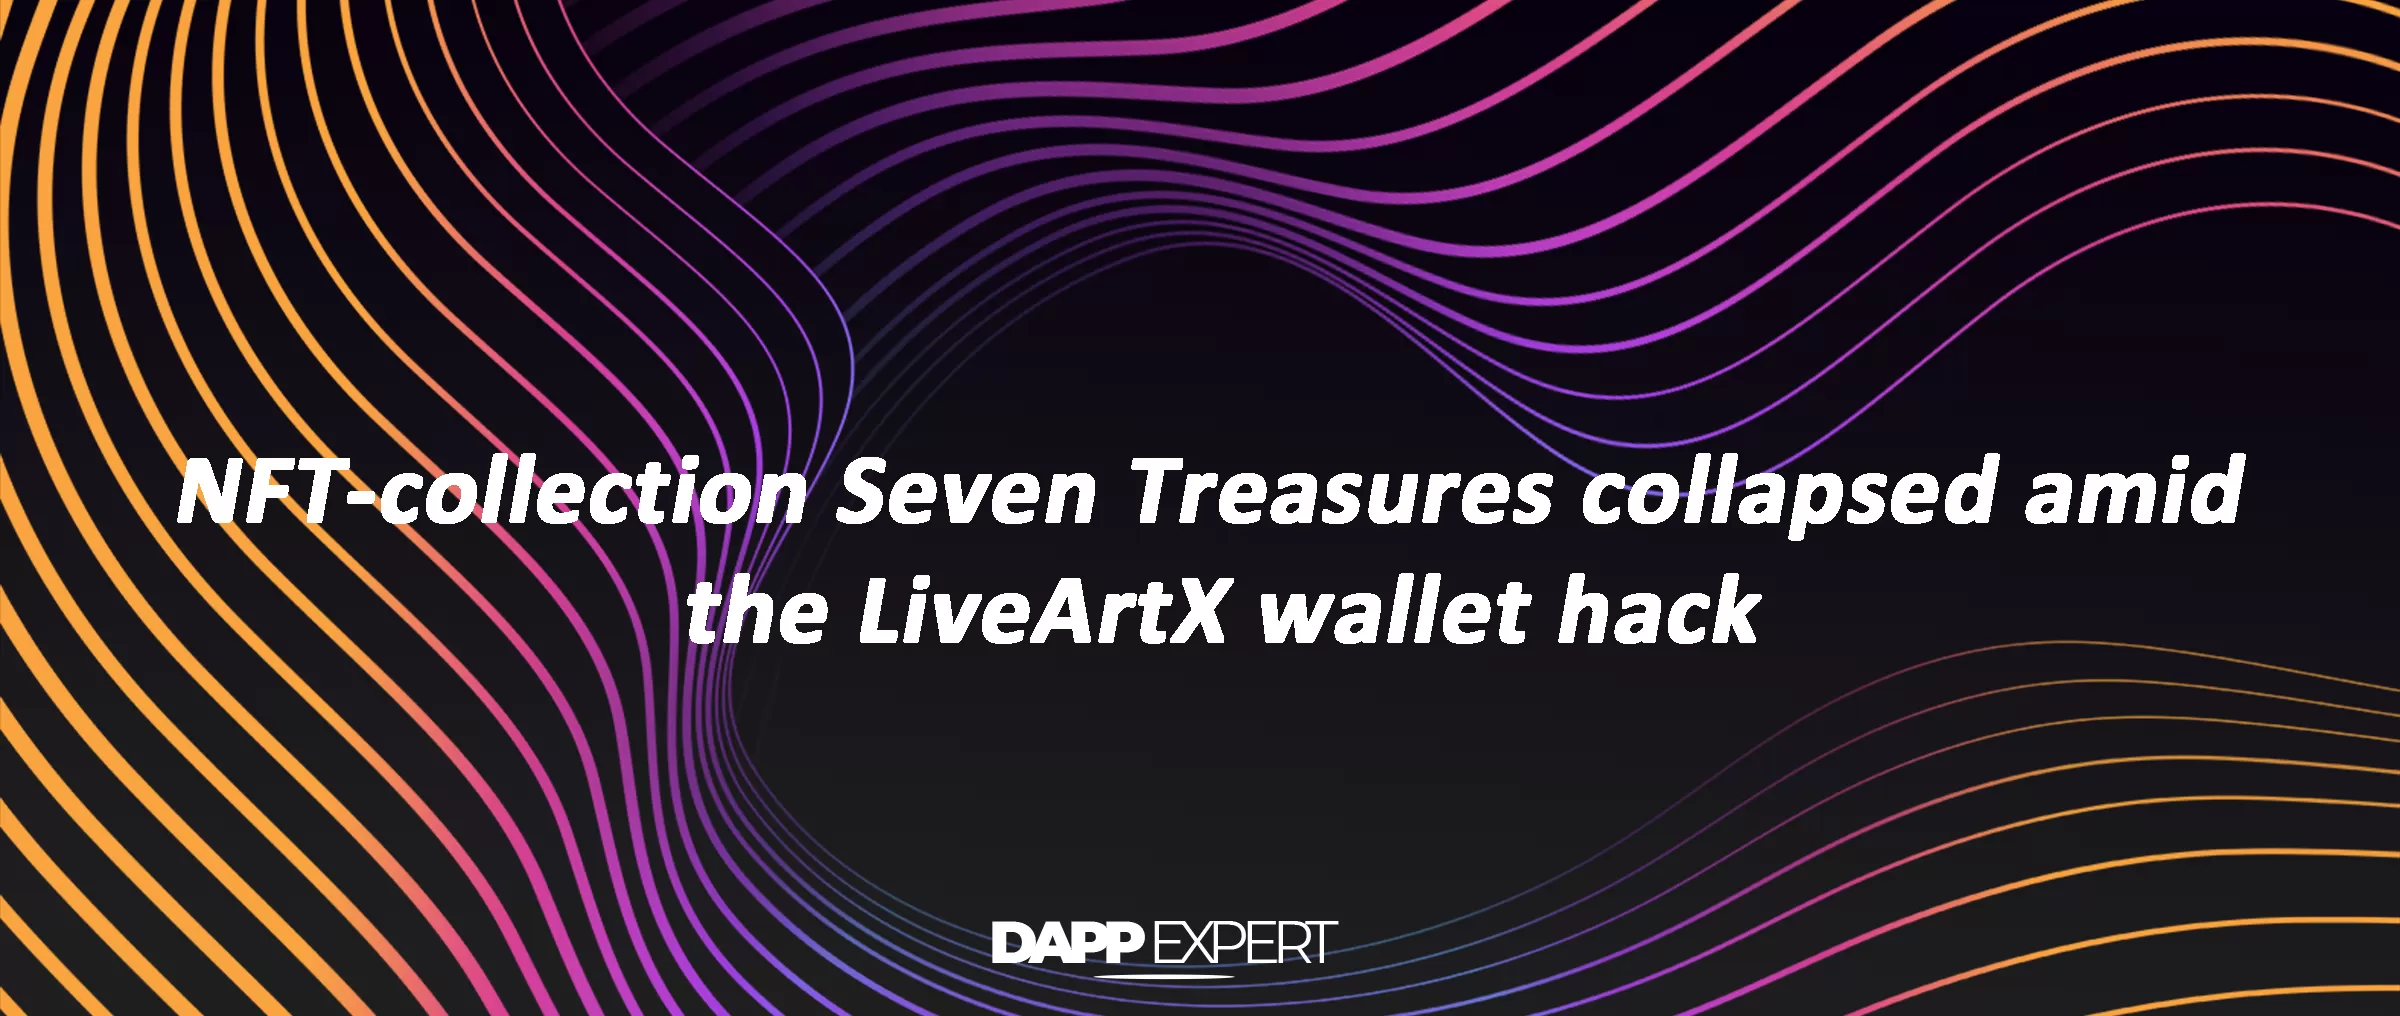 NFT-collection Seven Treasures collapsed amid the LiveArtX wallet hack